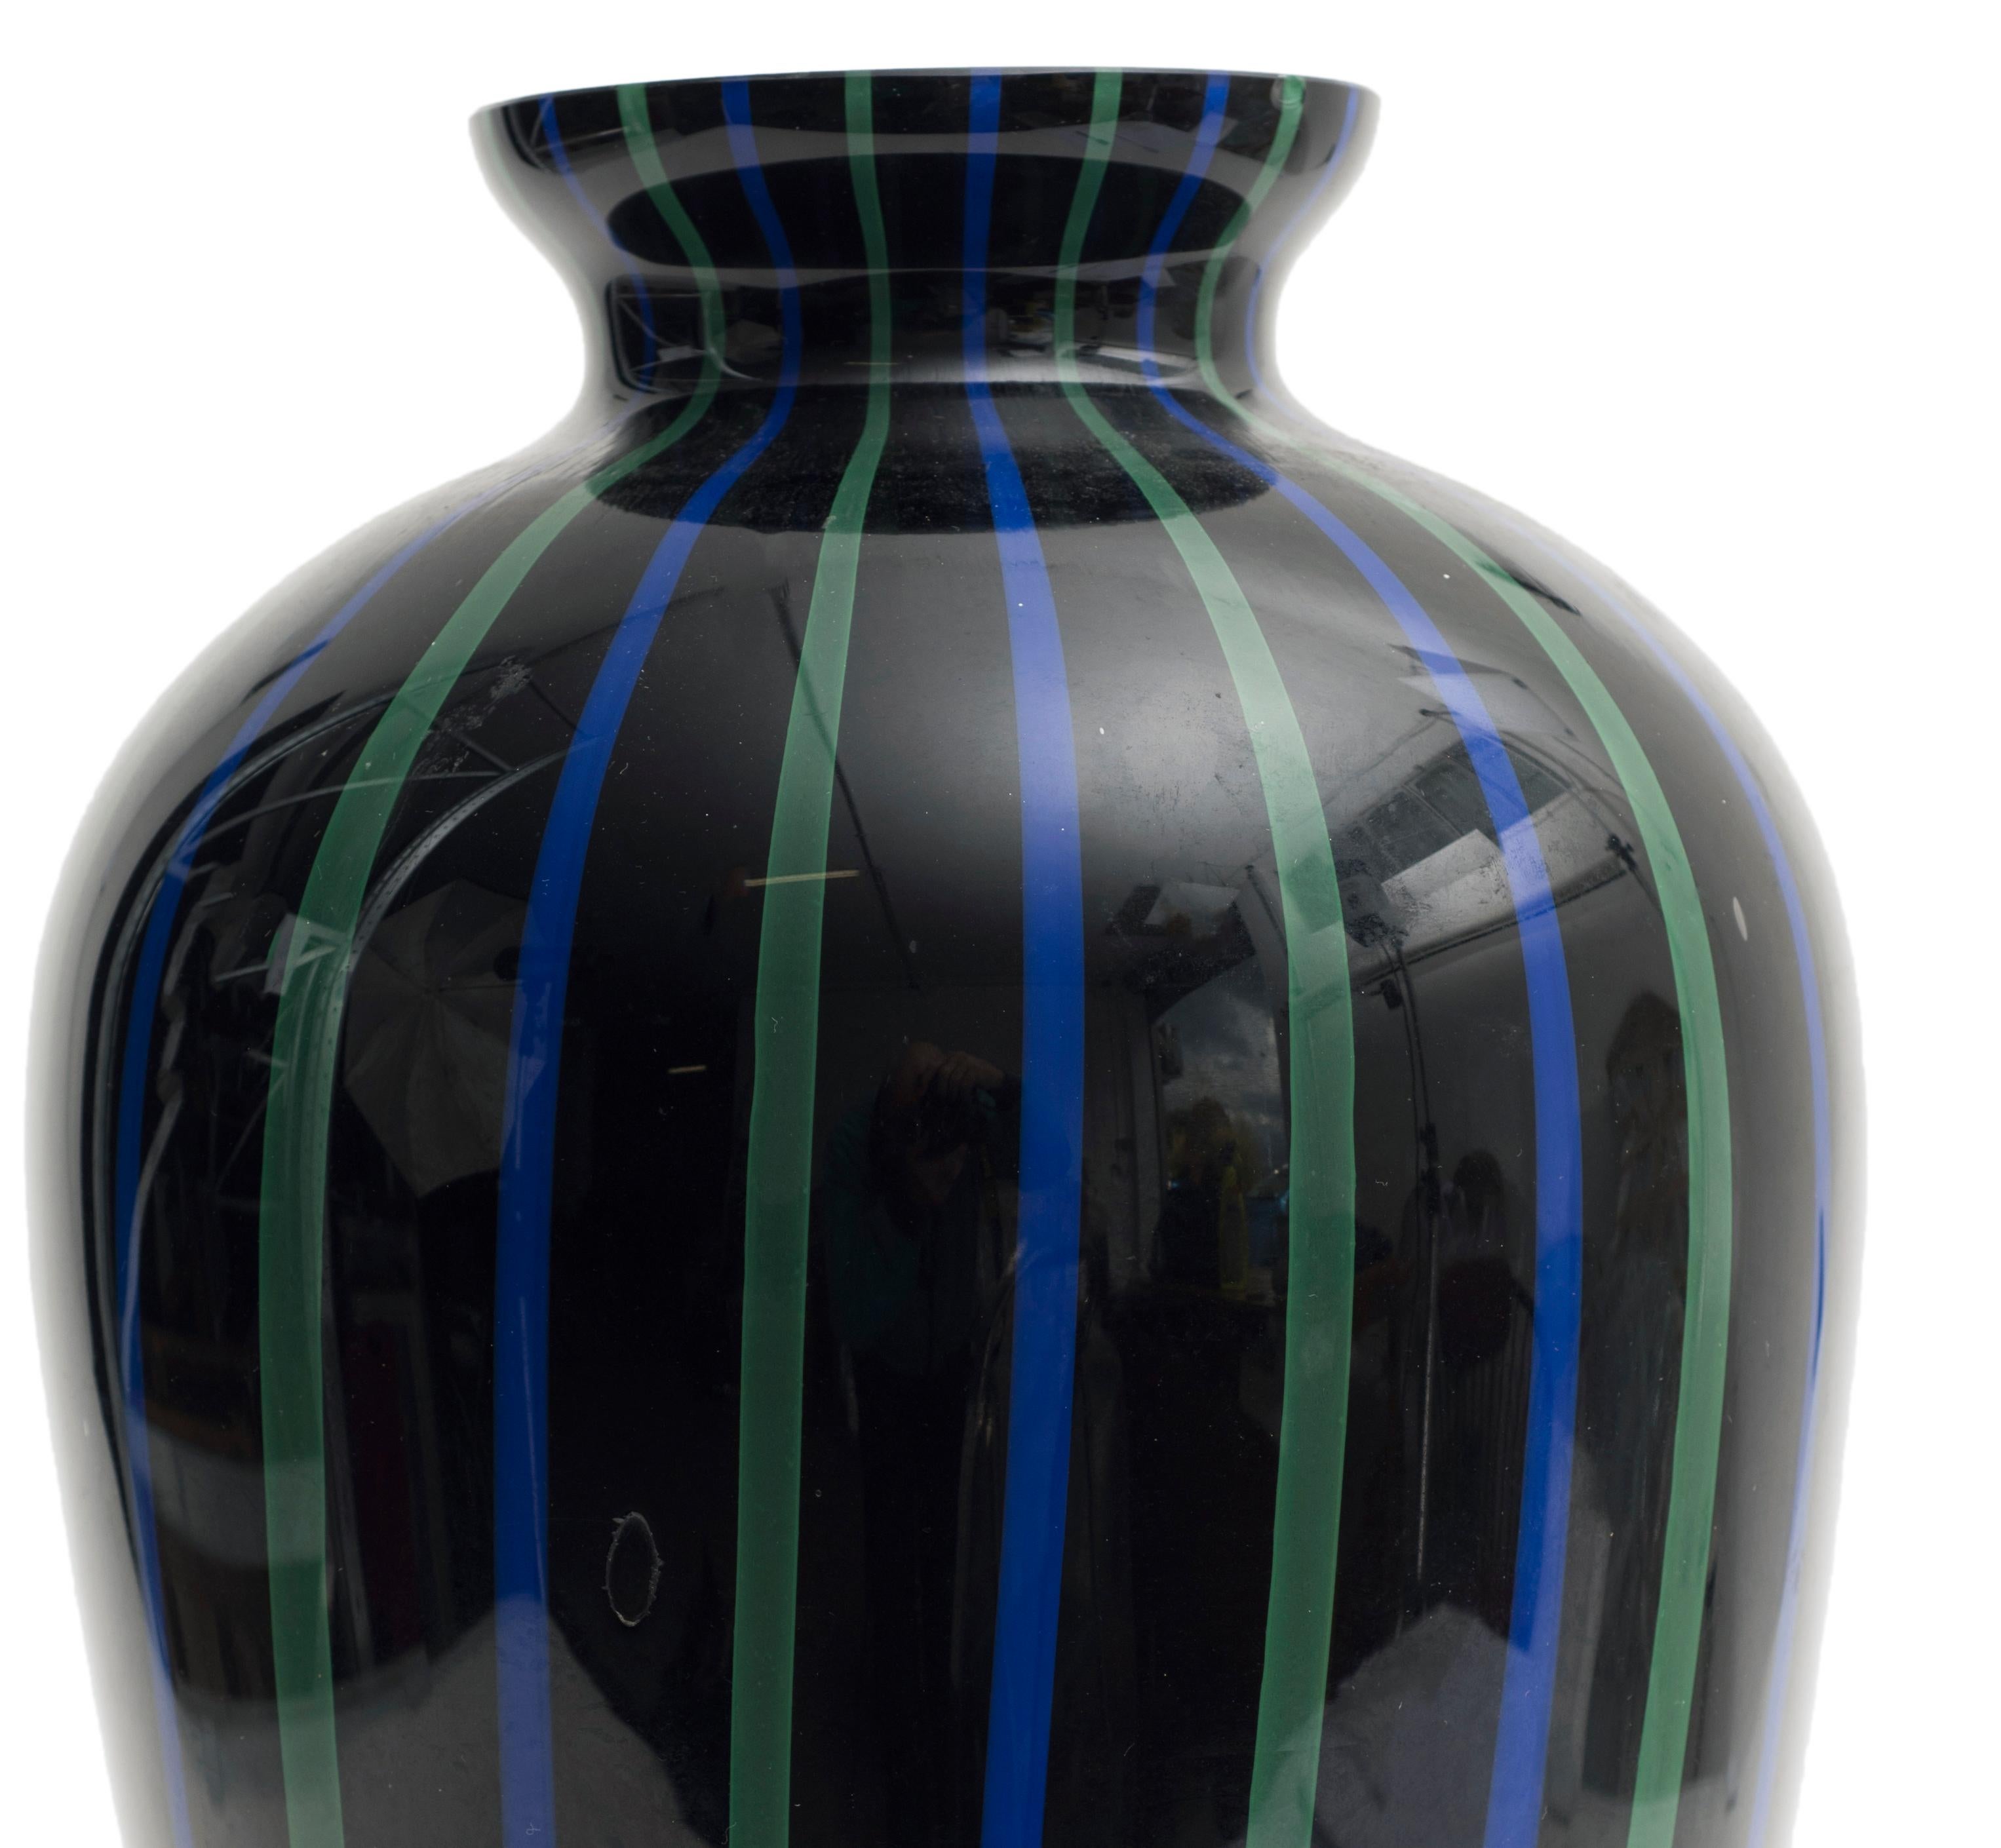 Beautiful Murano glass vase.
The vase is black decorated with green and blue vertical lines.
Created in 1970s.
Very good conditions.